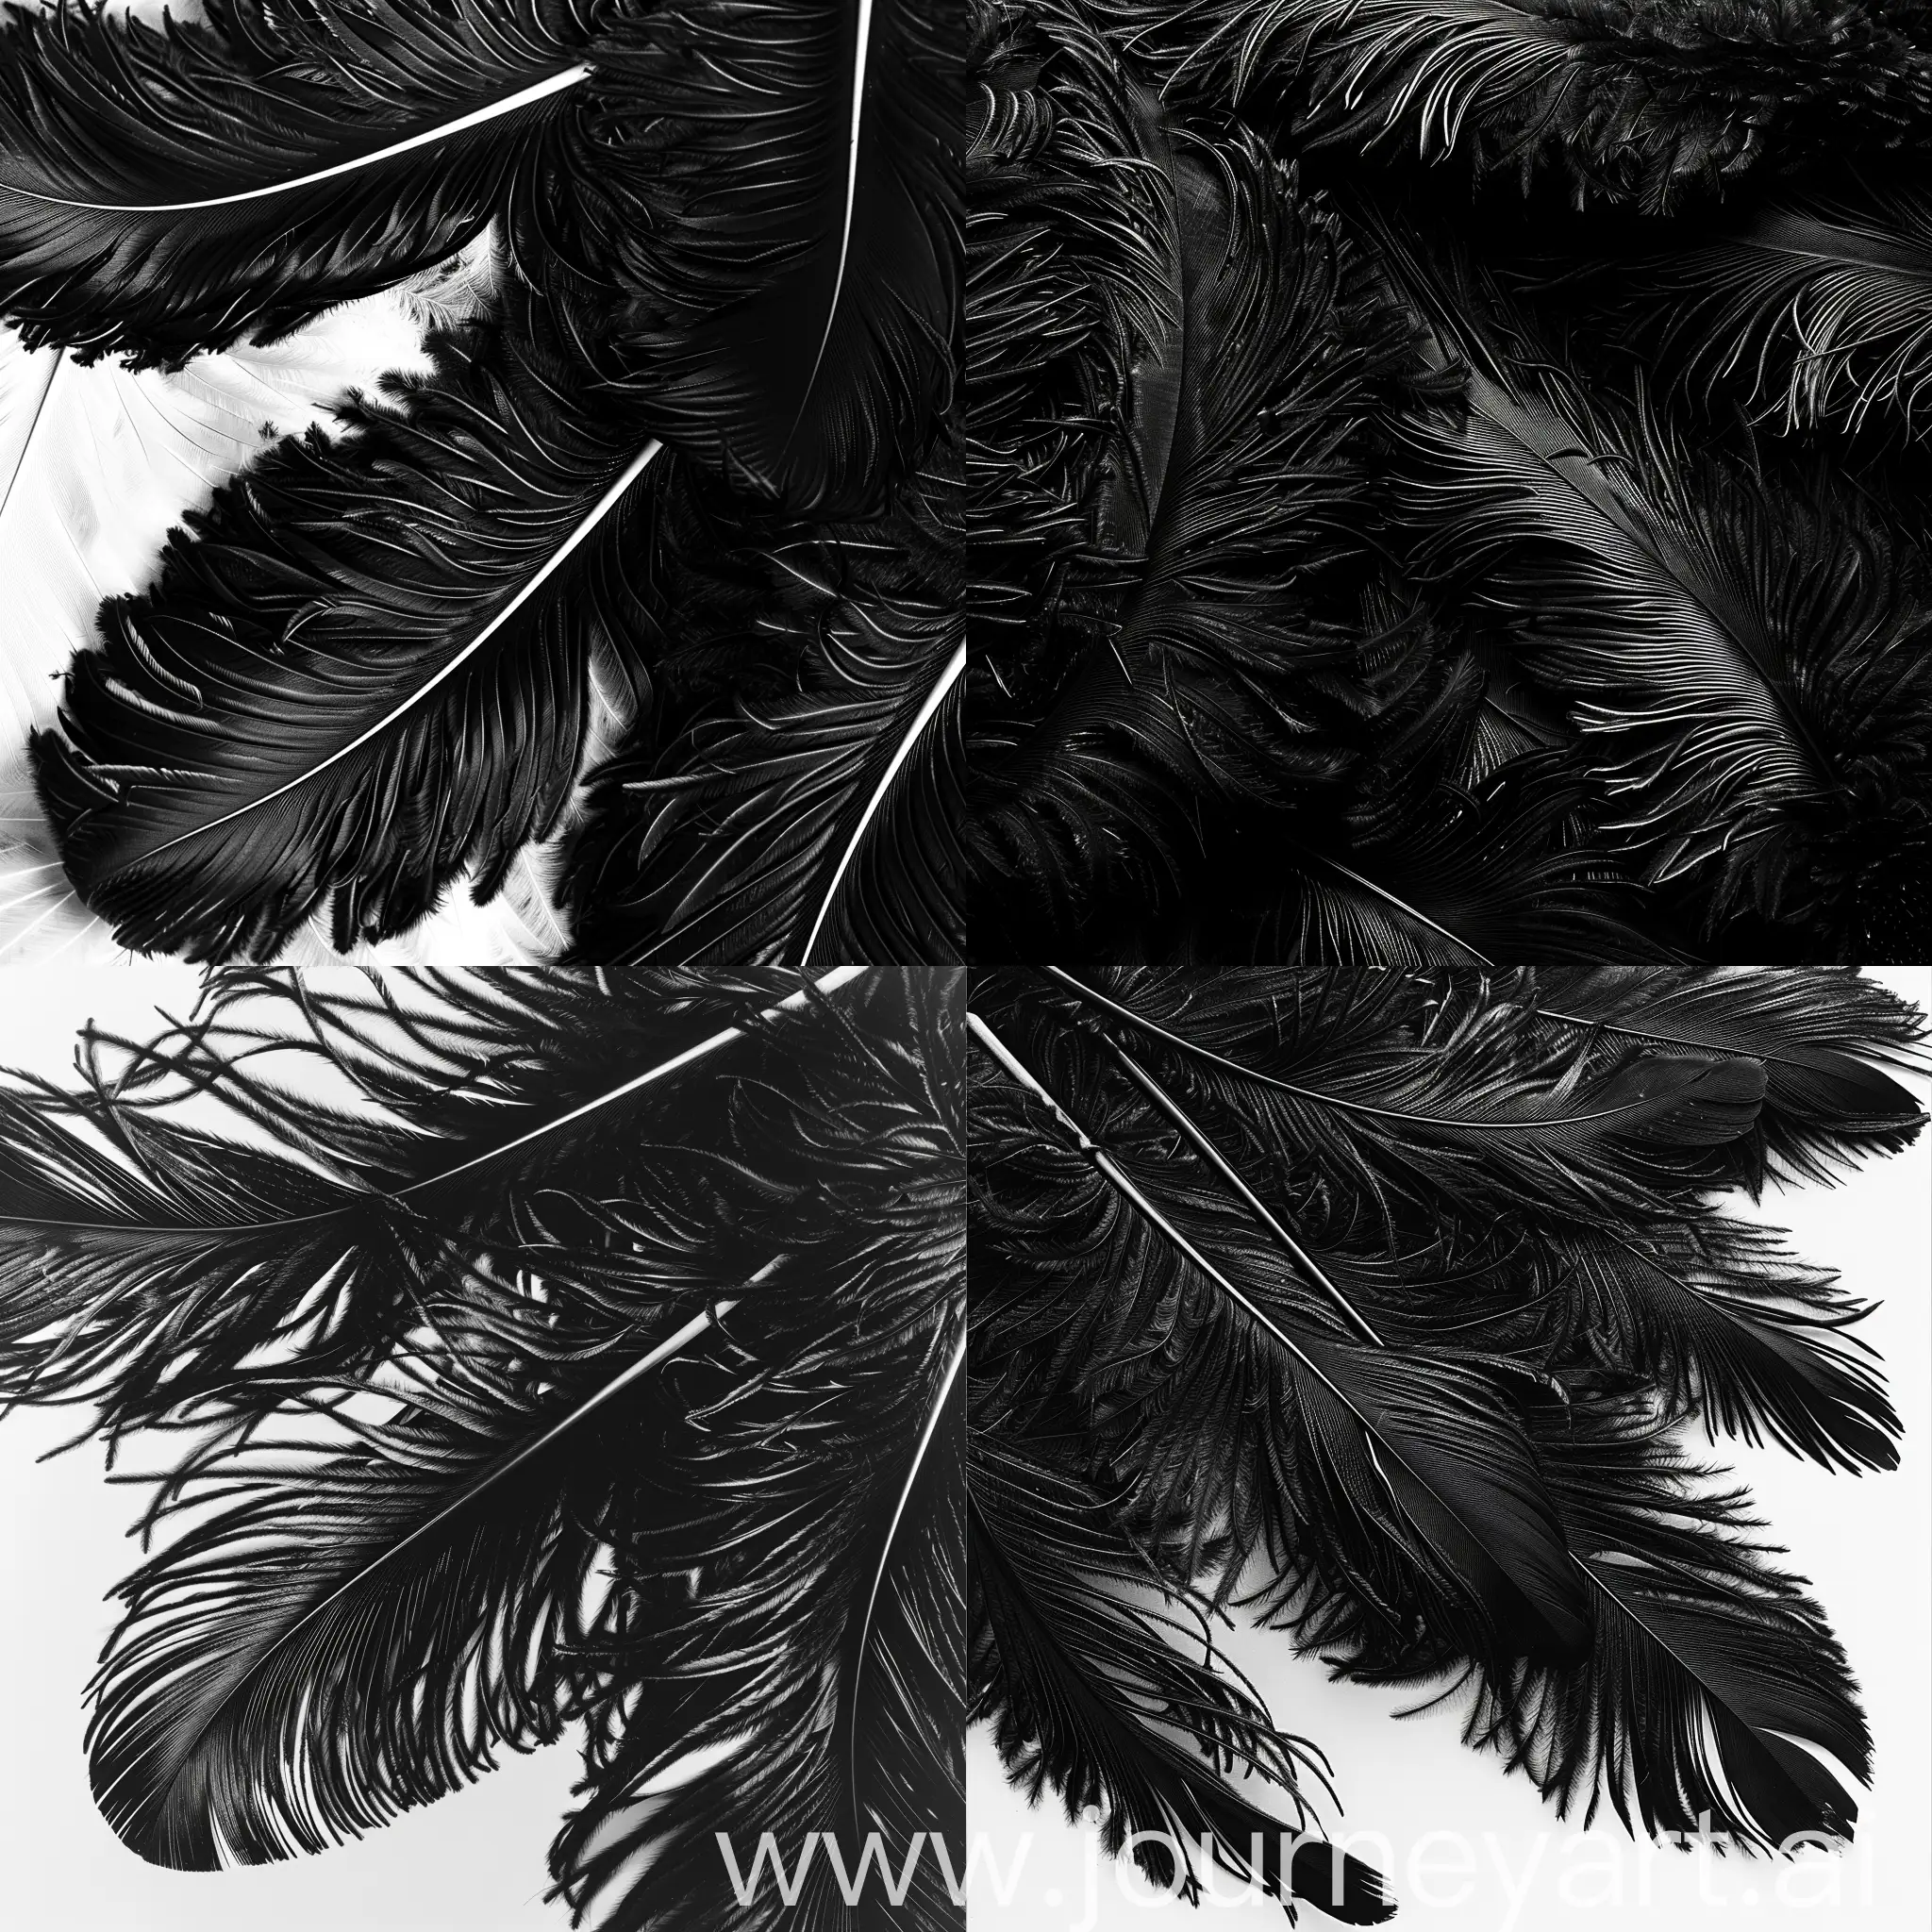 Hyper-realistic lack and white photo: black ostrich feathers